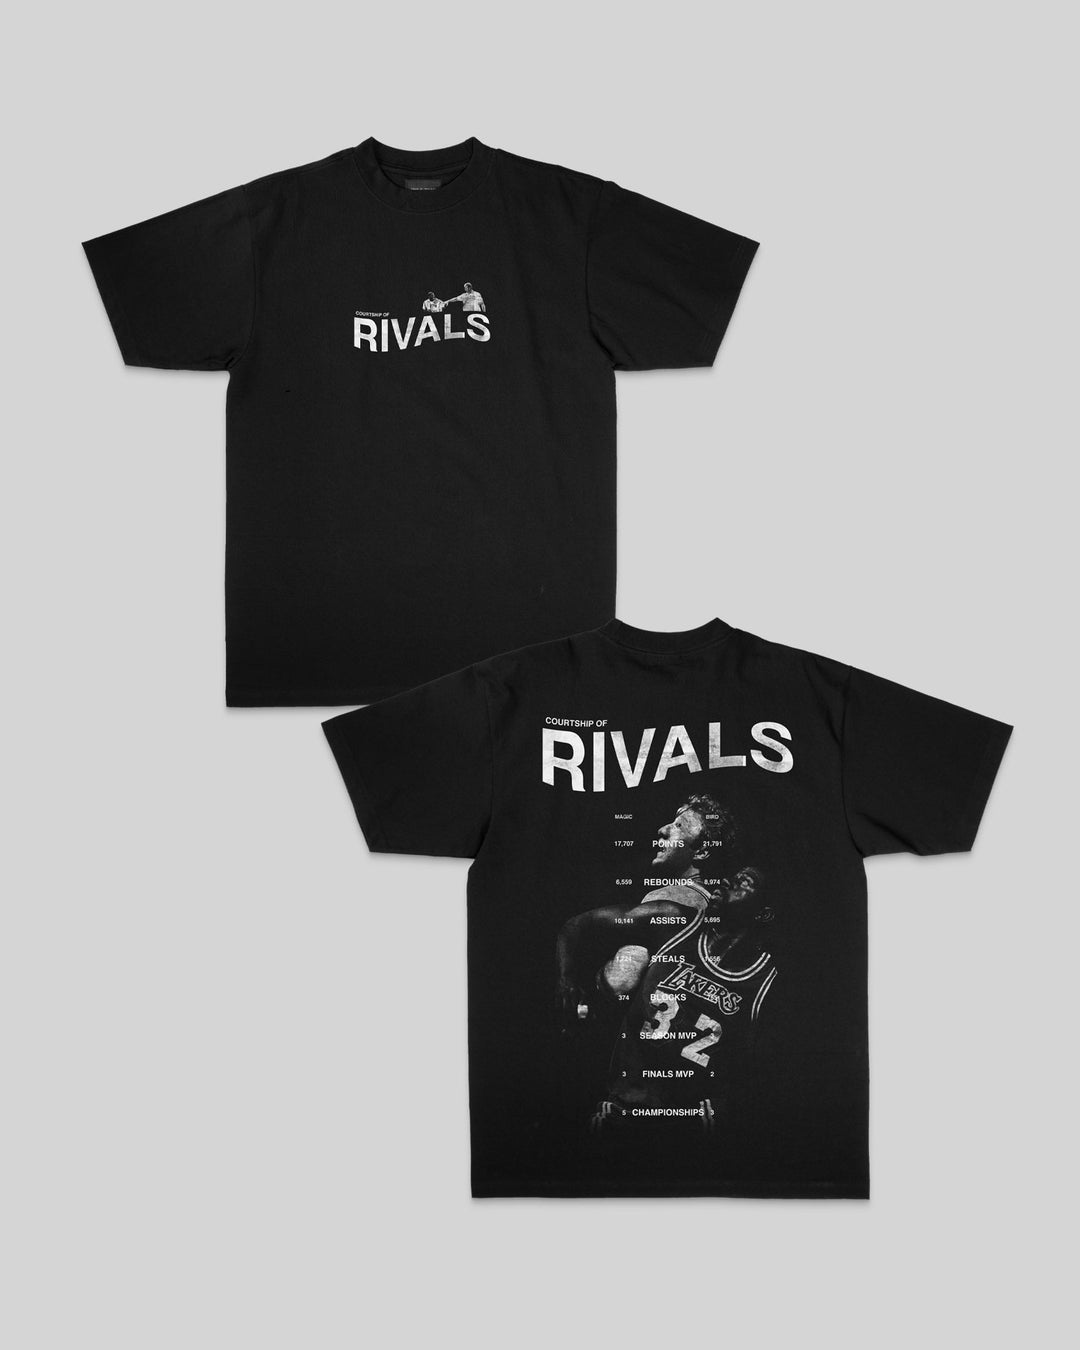 Courtship of Rivals Tee - trainofthoughtcollective